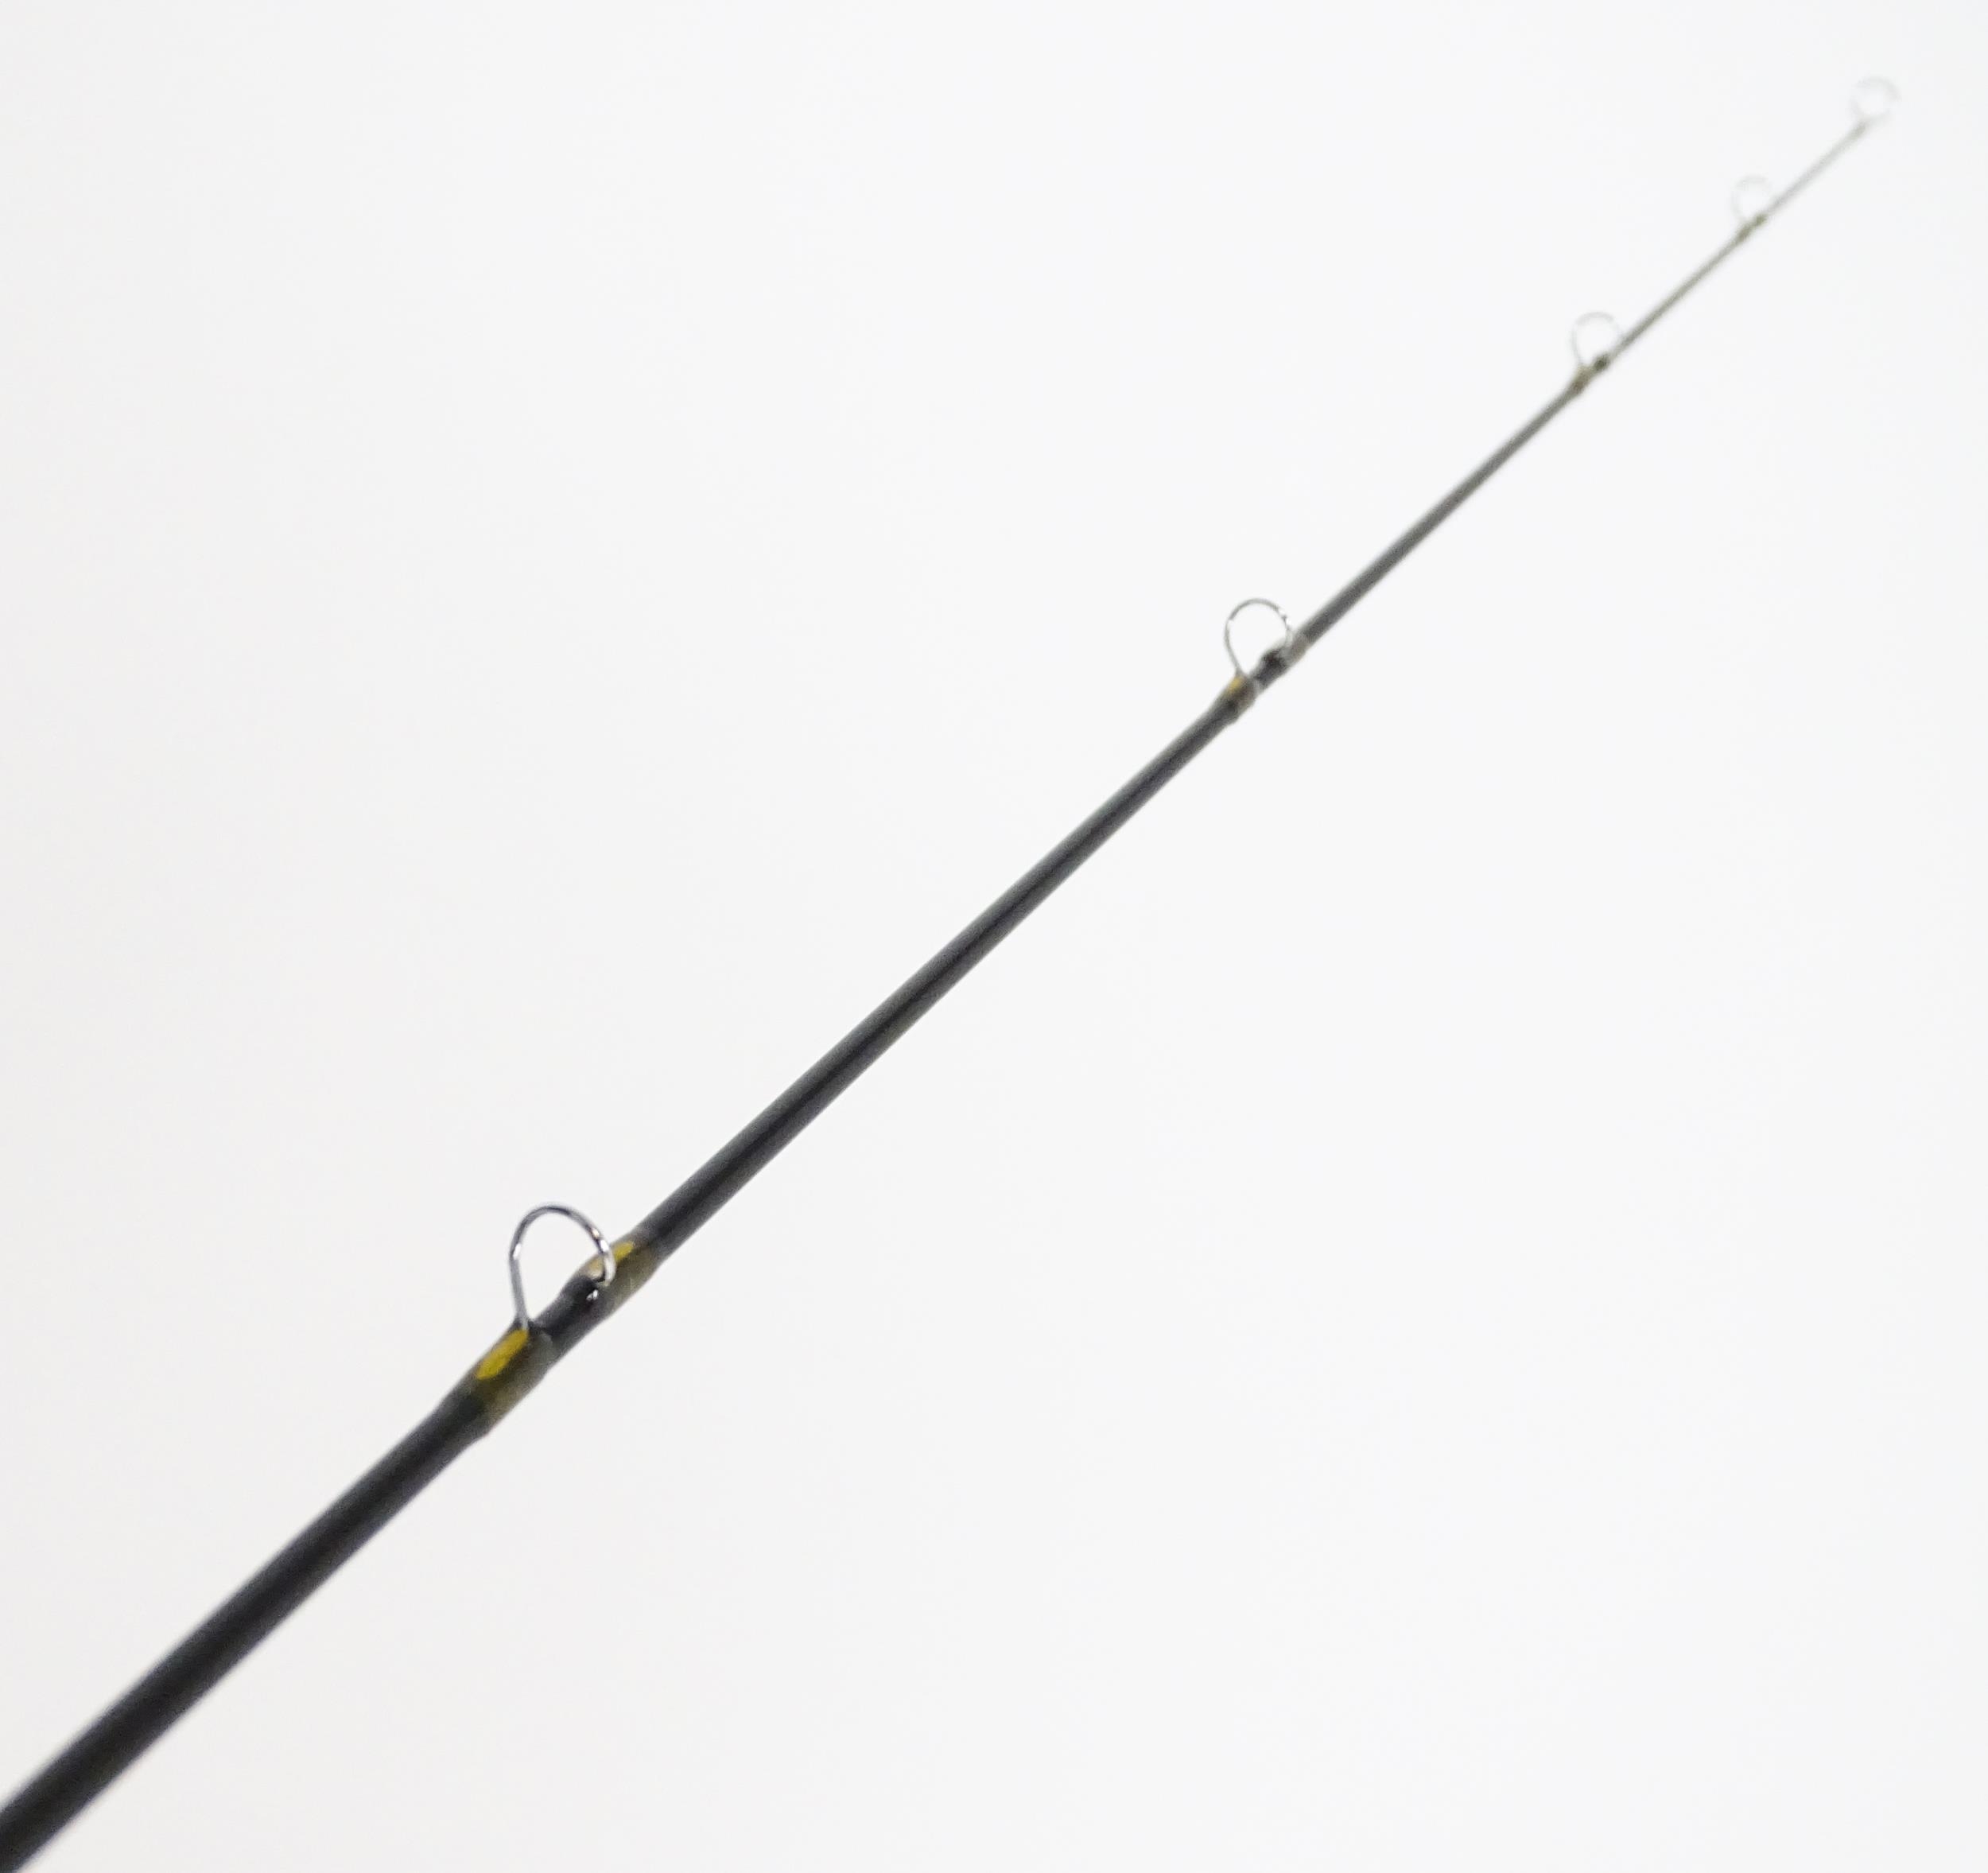 Fishing : a Sage (USA) 'XP 796 Graphite IIIe' two-piece fly rod, approx 114" long. With cloth case - Image 6 of 7